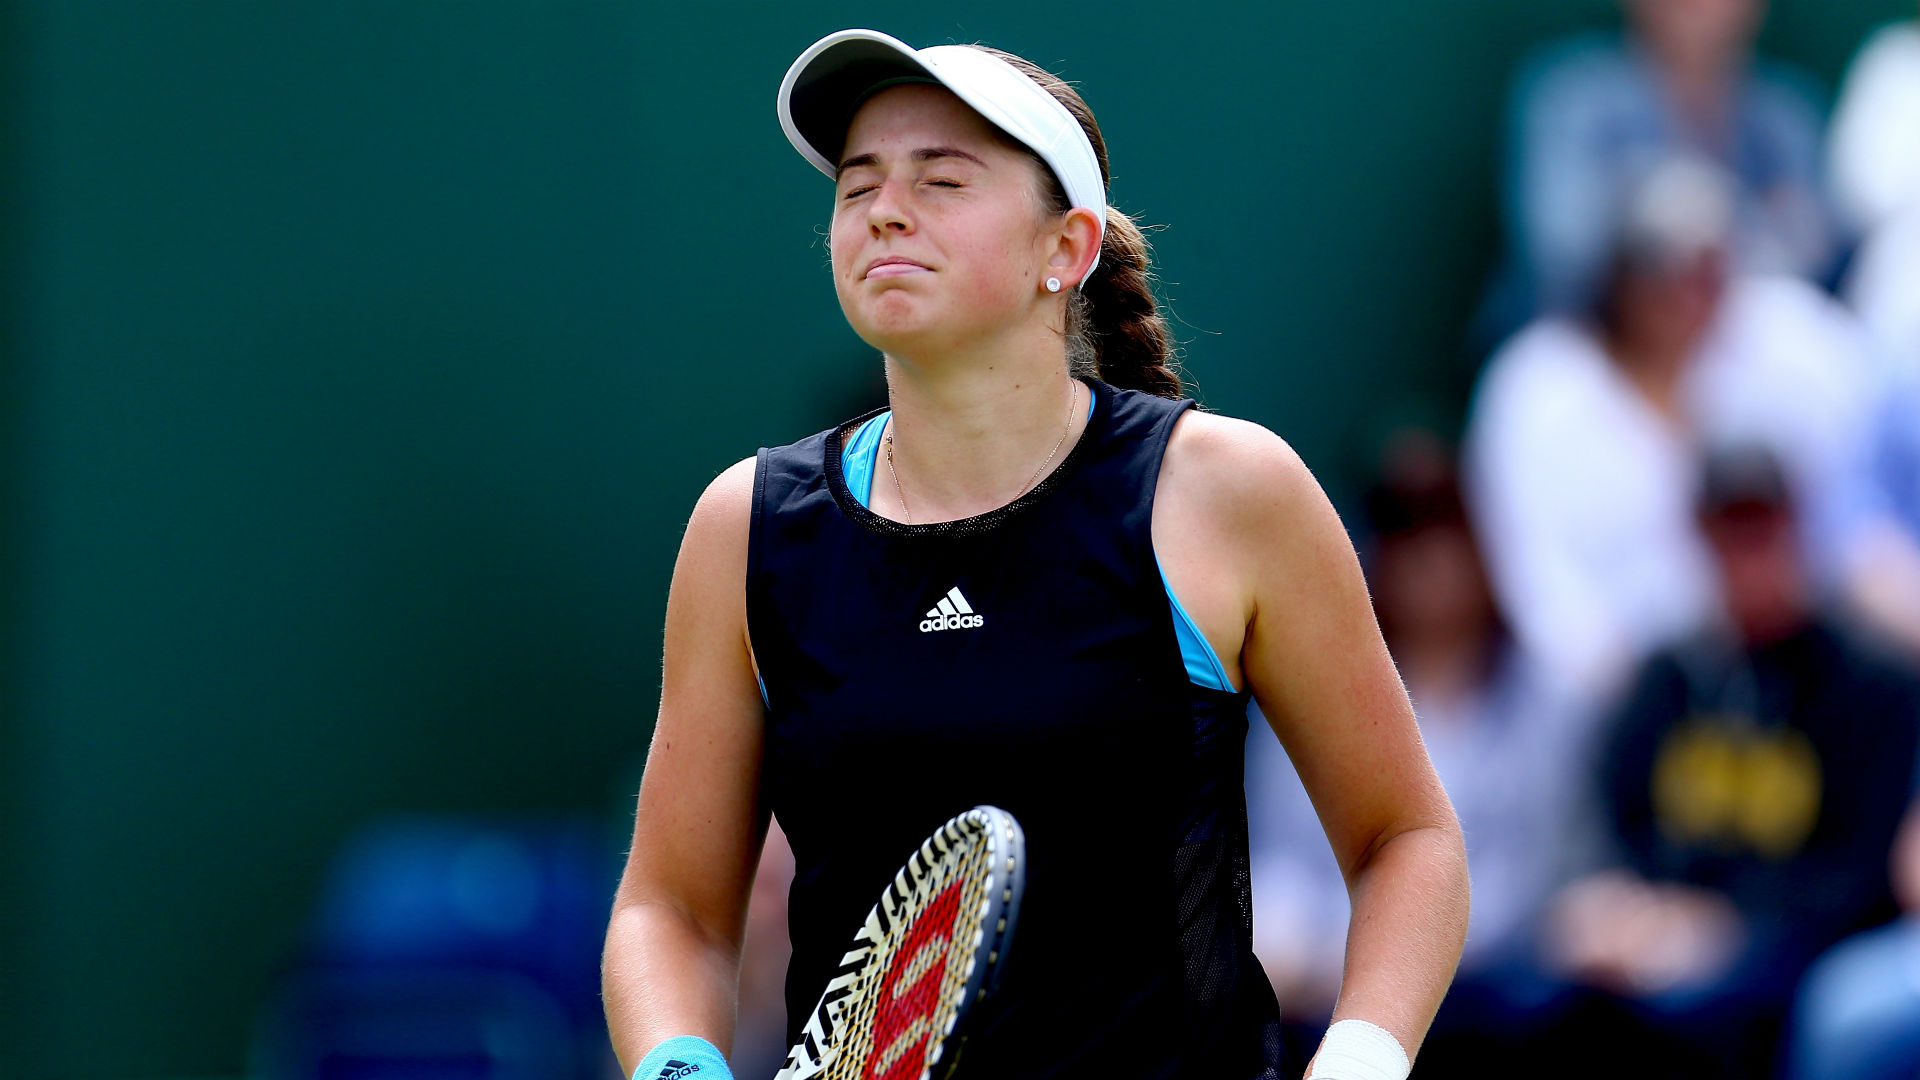 Home advantage counted for little as Jelena Ostapenko crashed out in the first round of the Baltic Open.